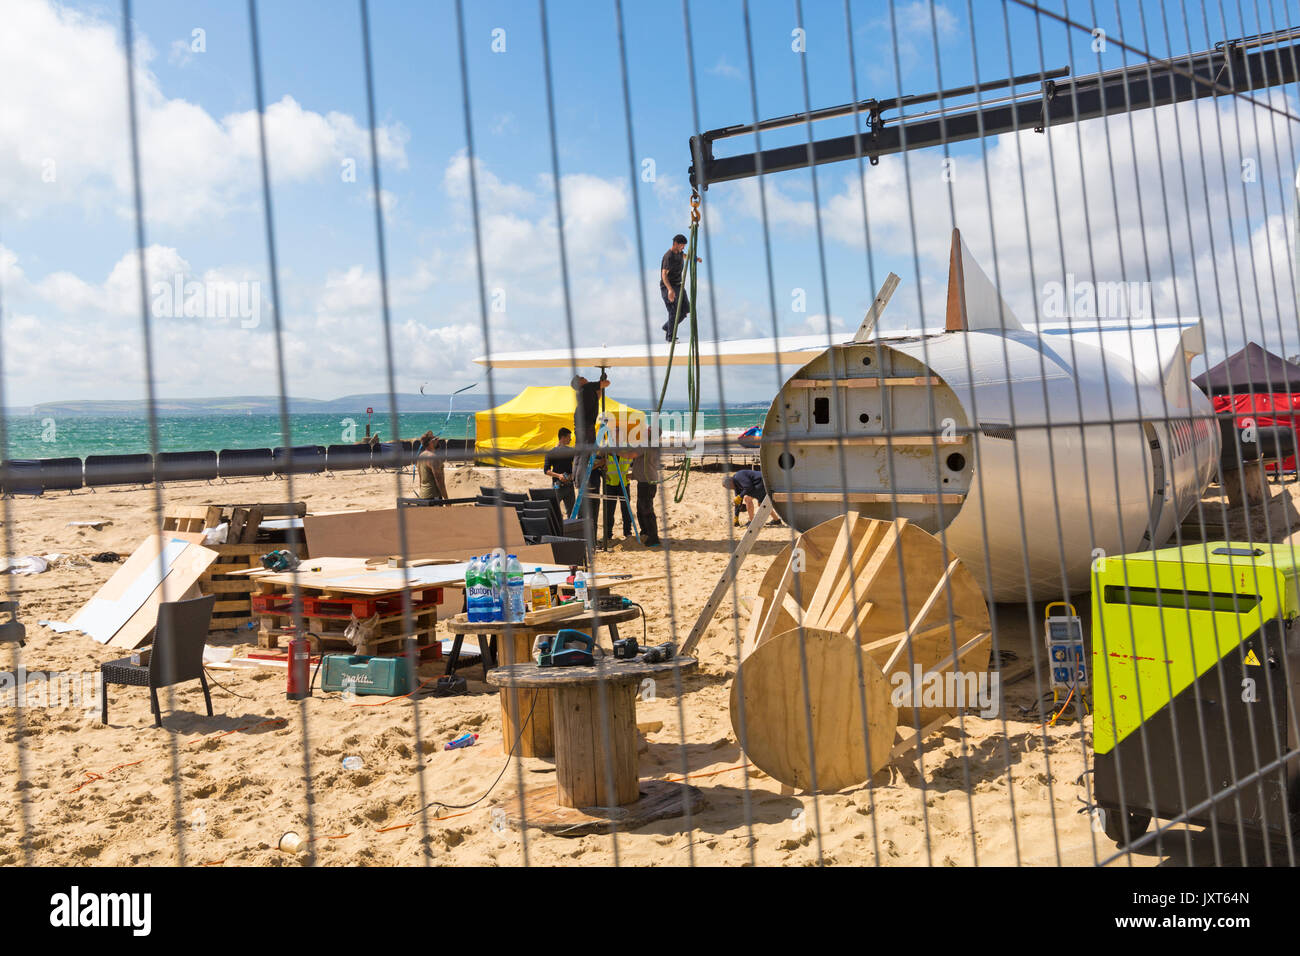 Bournemouth, Dorset, UK. 17th Aug, 2017. The UK's first aerobar is being prepared at Bournemouth beach as the 'pretend' airport takes shape. The 73ft ATR 42 aircraft is being converted into a mobile bar and the surrounding beach area transformed into airport terminal with departure lounge, duty free, club class restaurant and VIP 1st class area. 'Passengers' will be given a boarding pass on arrival. The plane will be there for 17 days and will have live entertainment. The attraction is brought to town by Poole based company Immense Events. Credit: Carolyn Jenkins/Alamy Live News Stock Photo